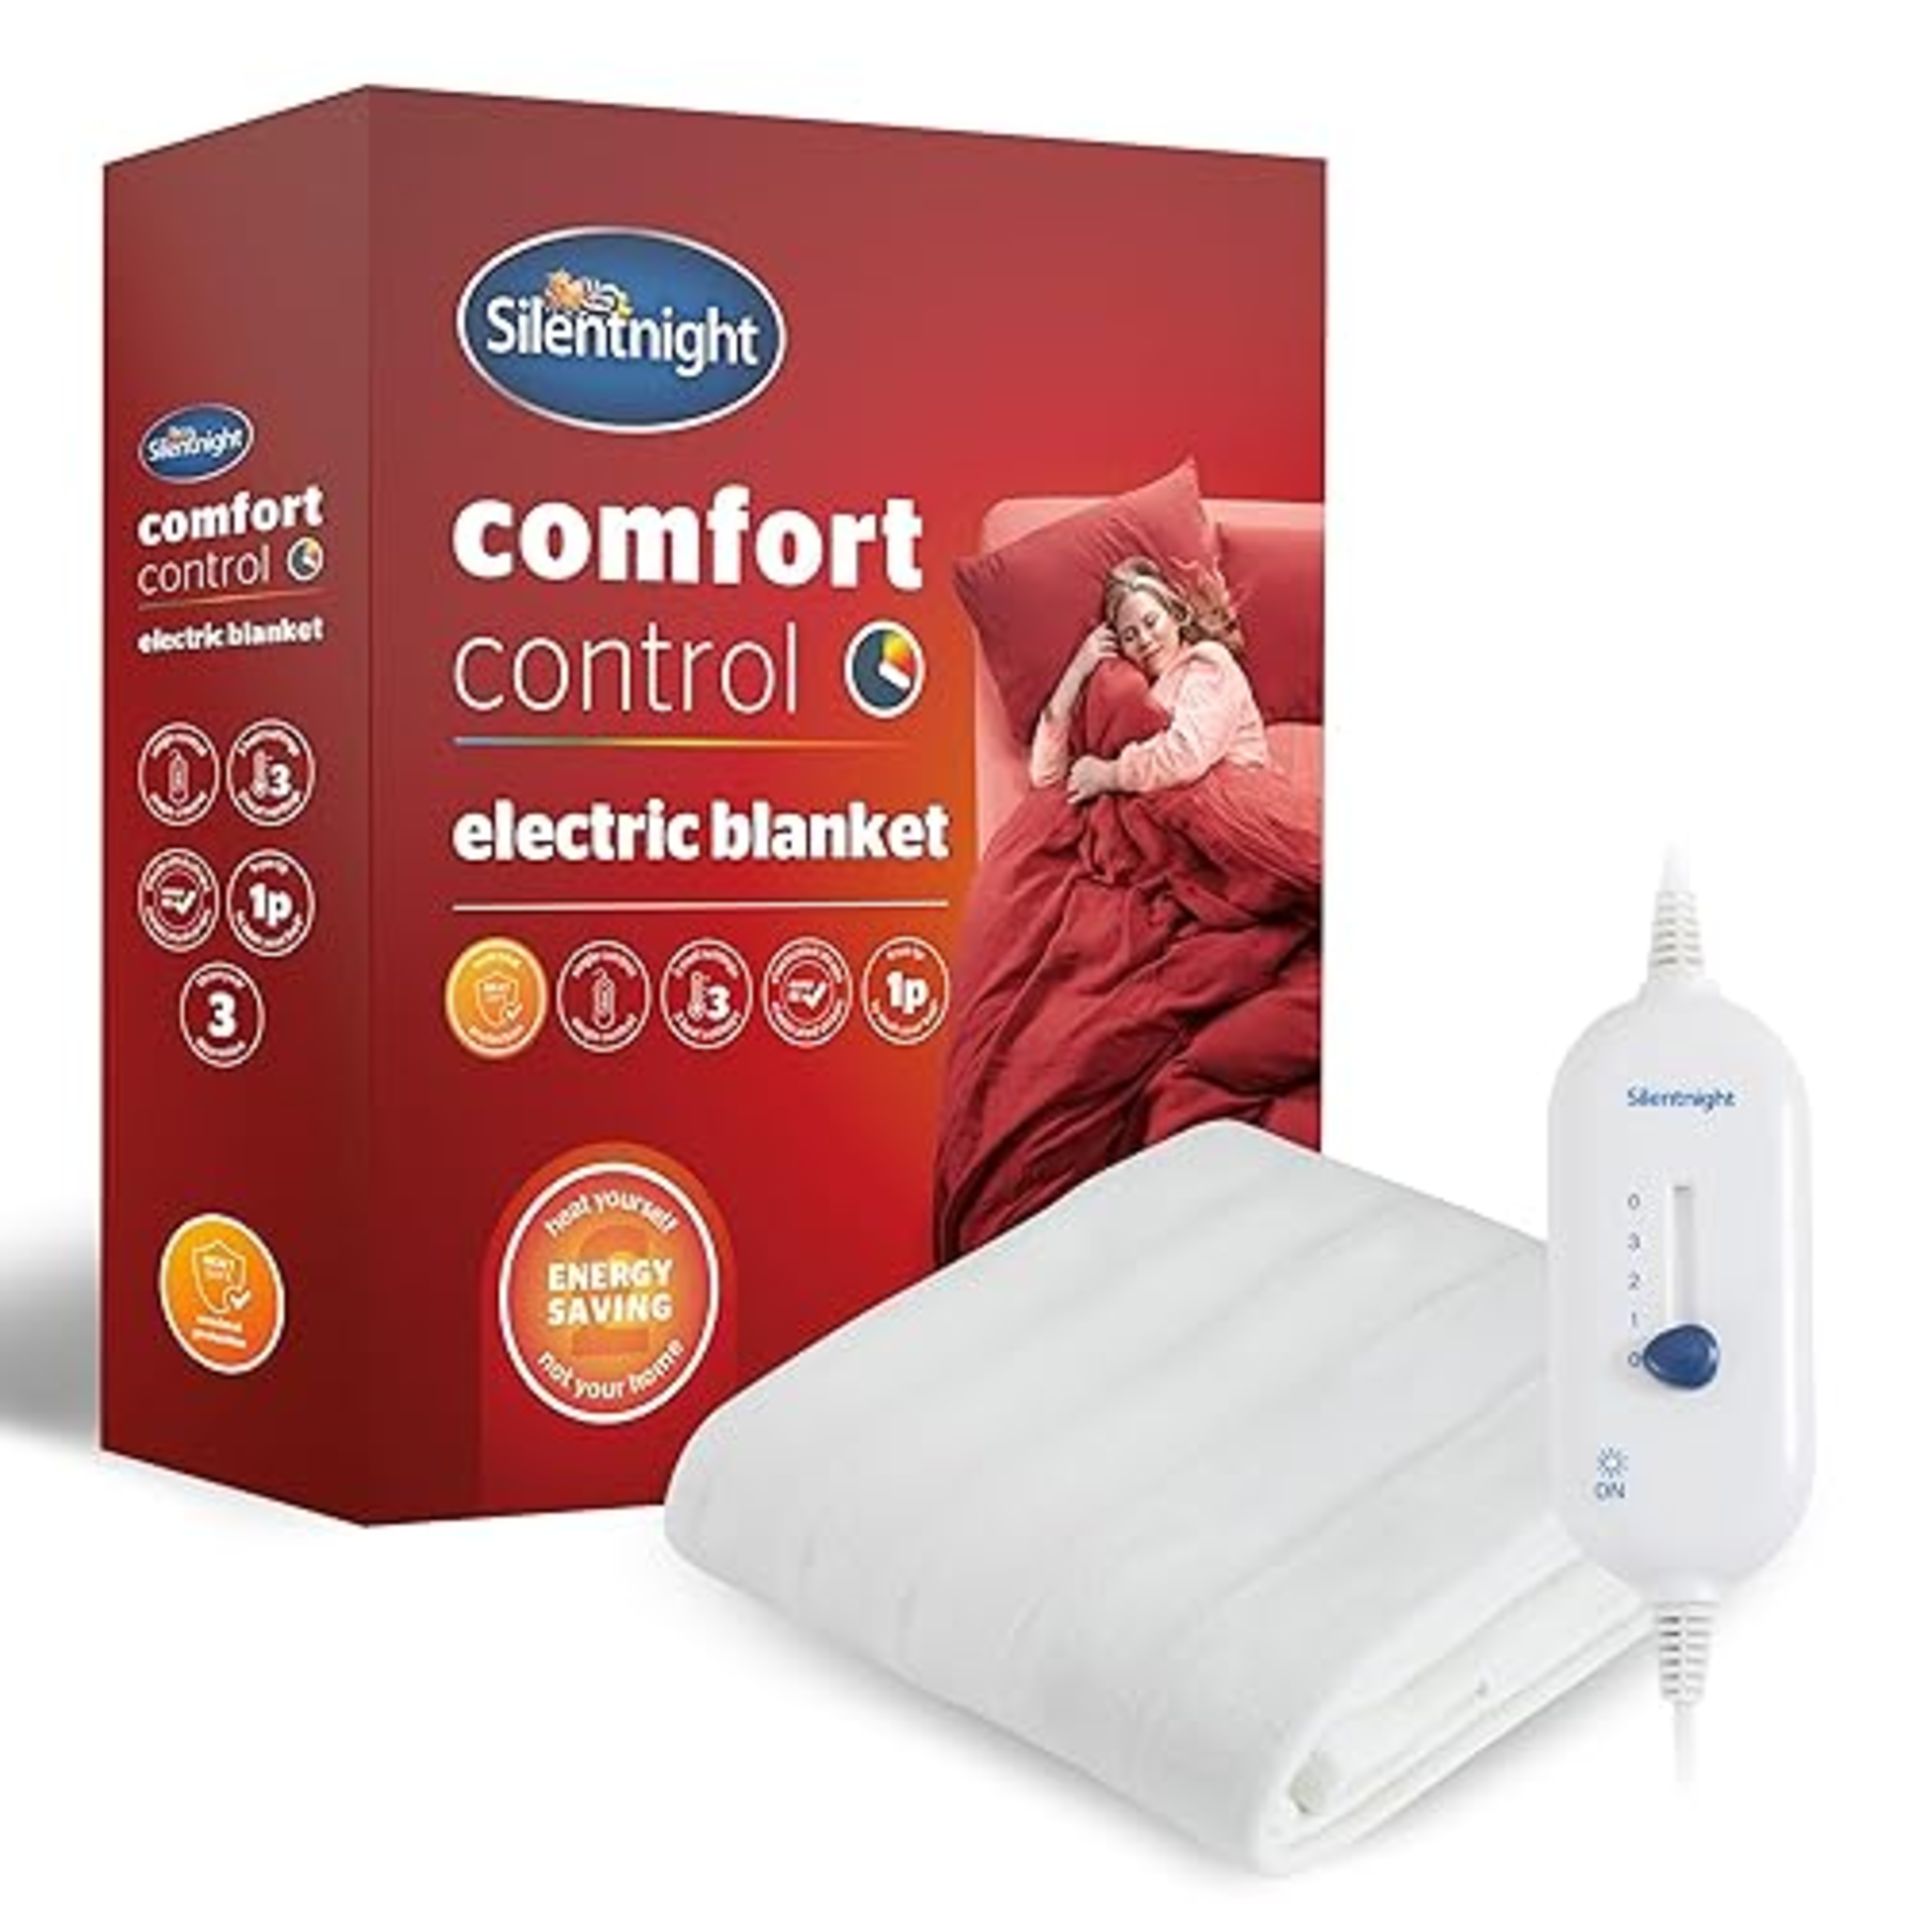 Silentnight Comfort Control Electric Blanket - Heated Electric Fitted Underblanket with 3 Heat Sett